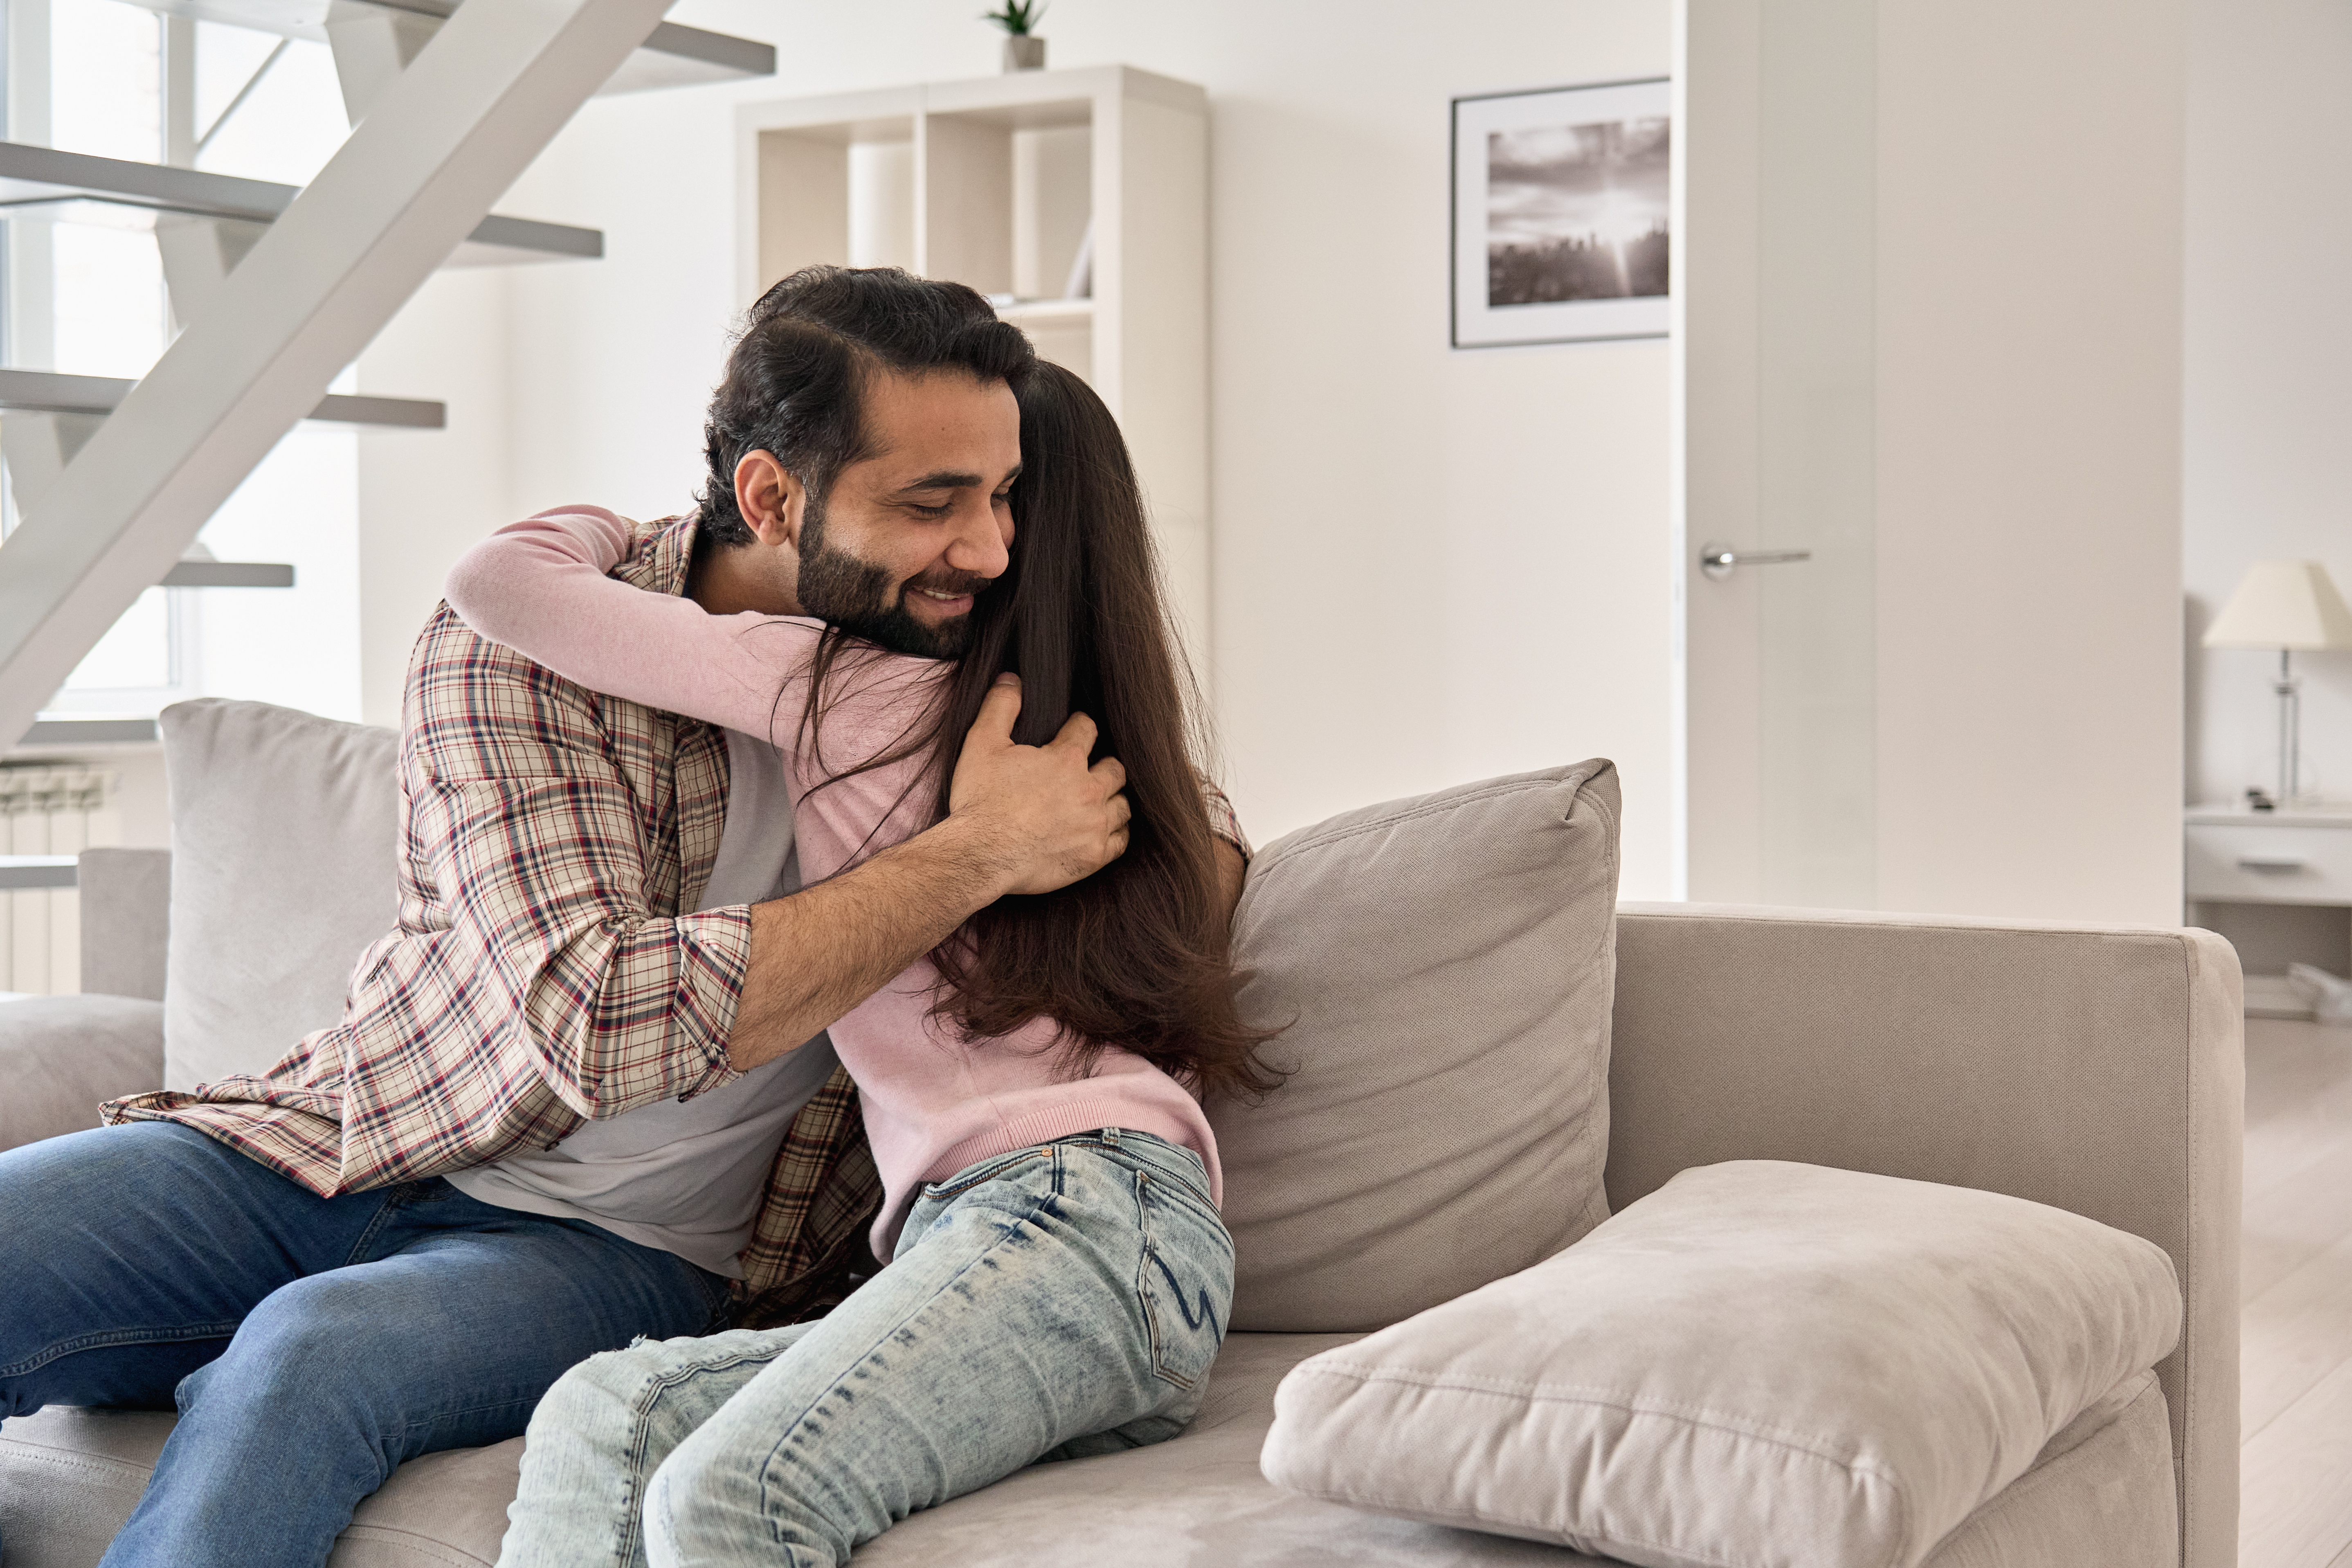 A happy father embracing his teenage daughter at home | Source: Shutterstock